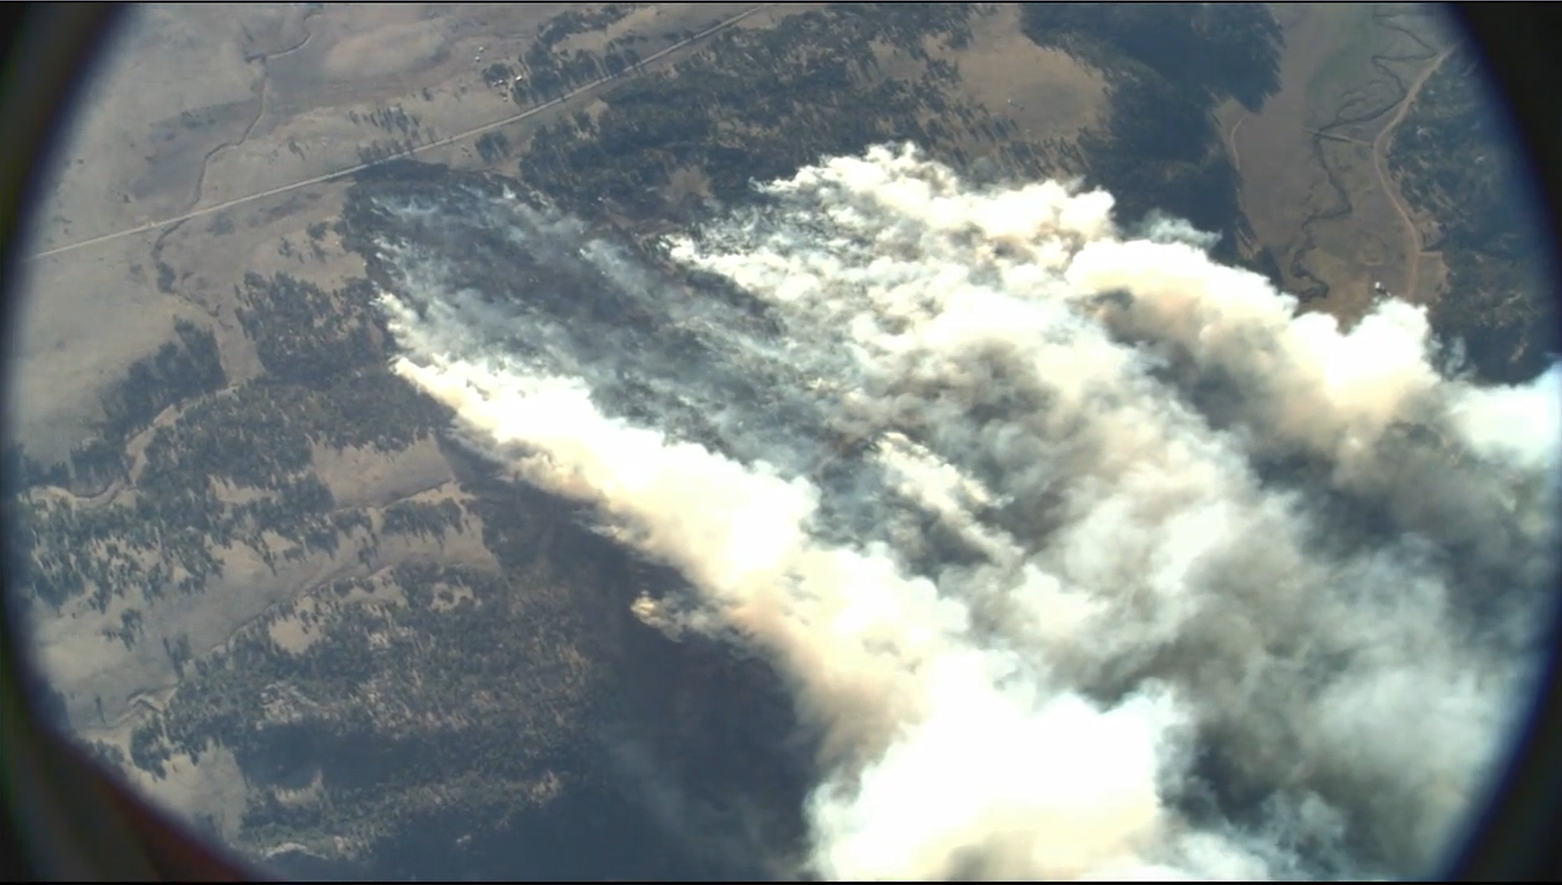 The aerial view shows a smoke column drifting from the High Park Fire